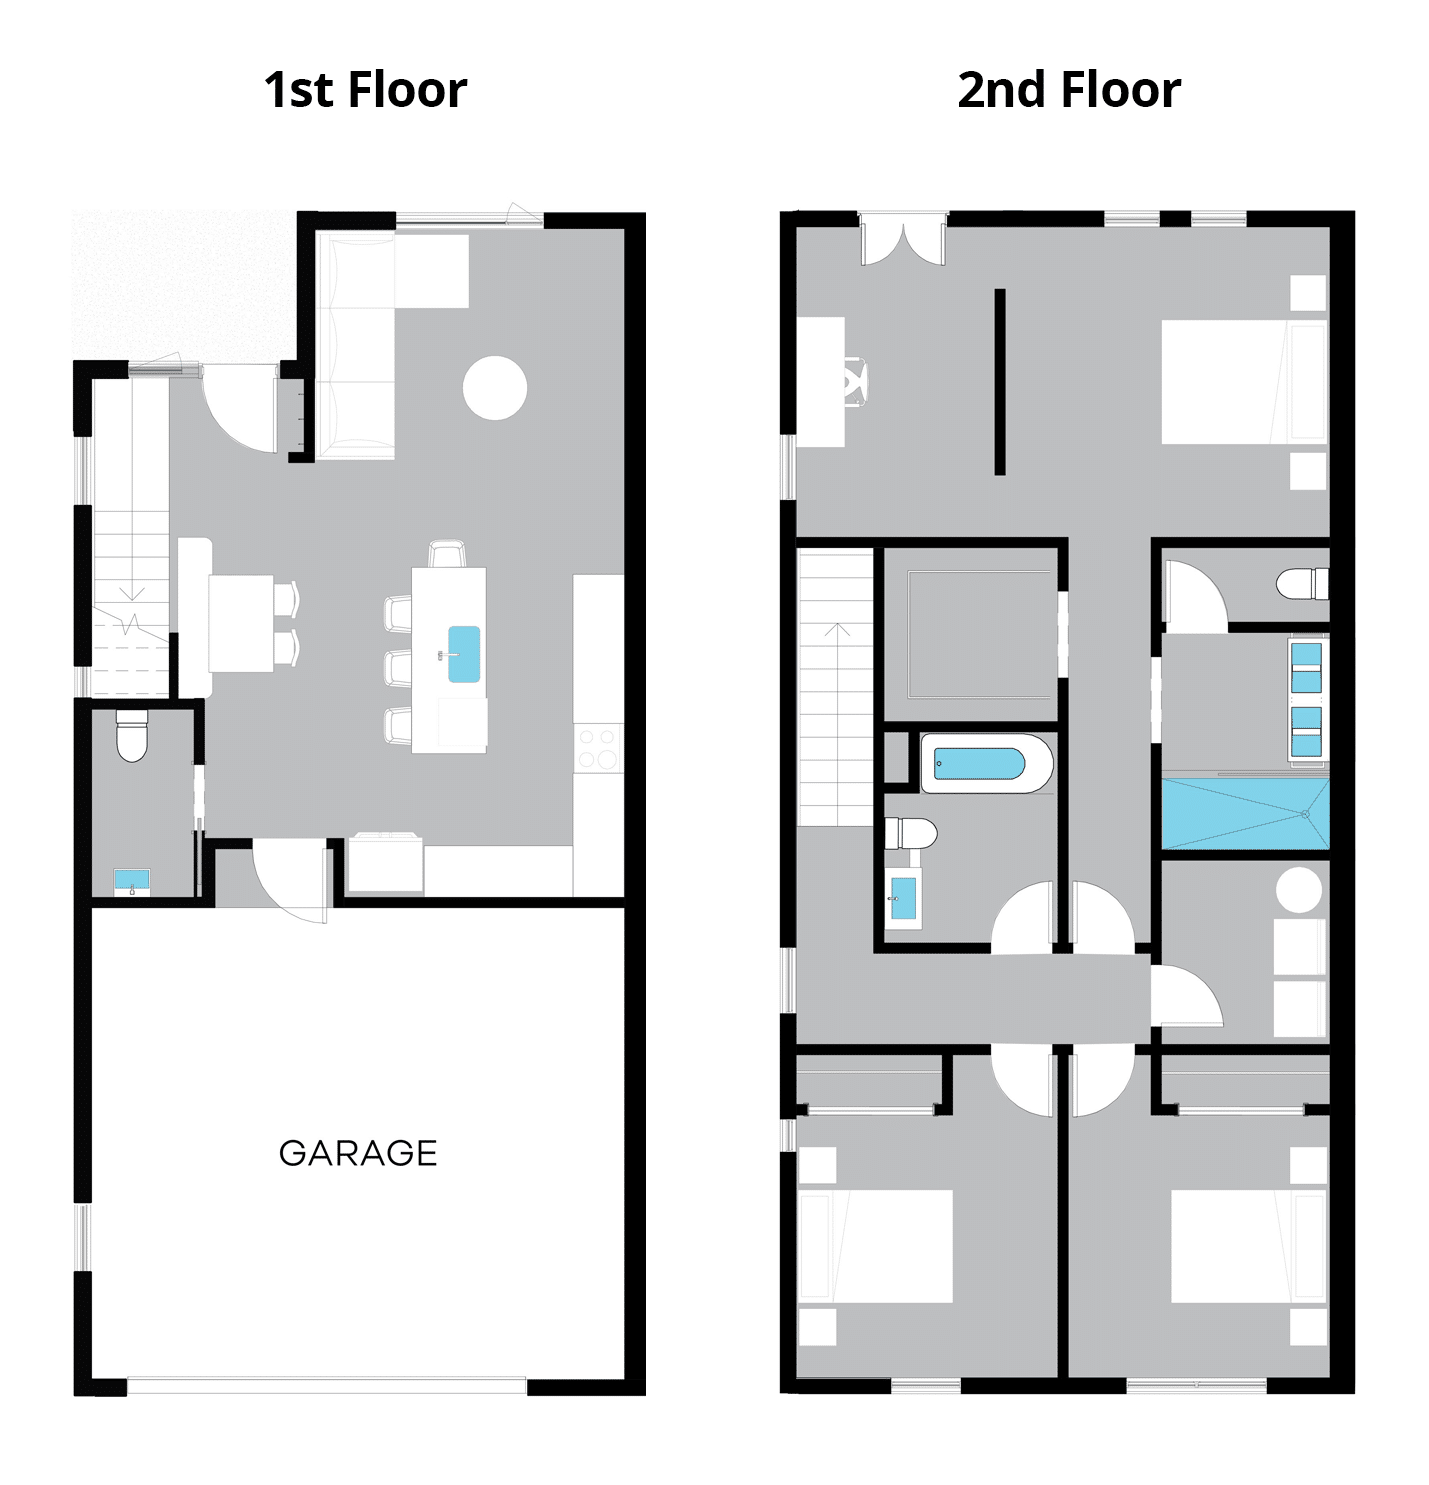 3 Bedroom Floorplan in the 92 Ave Residences Westminster Colorado Townhome Community